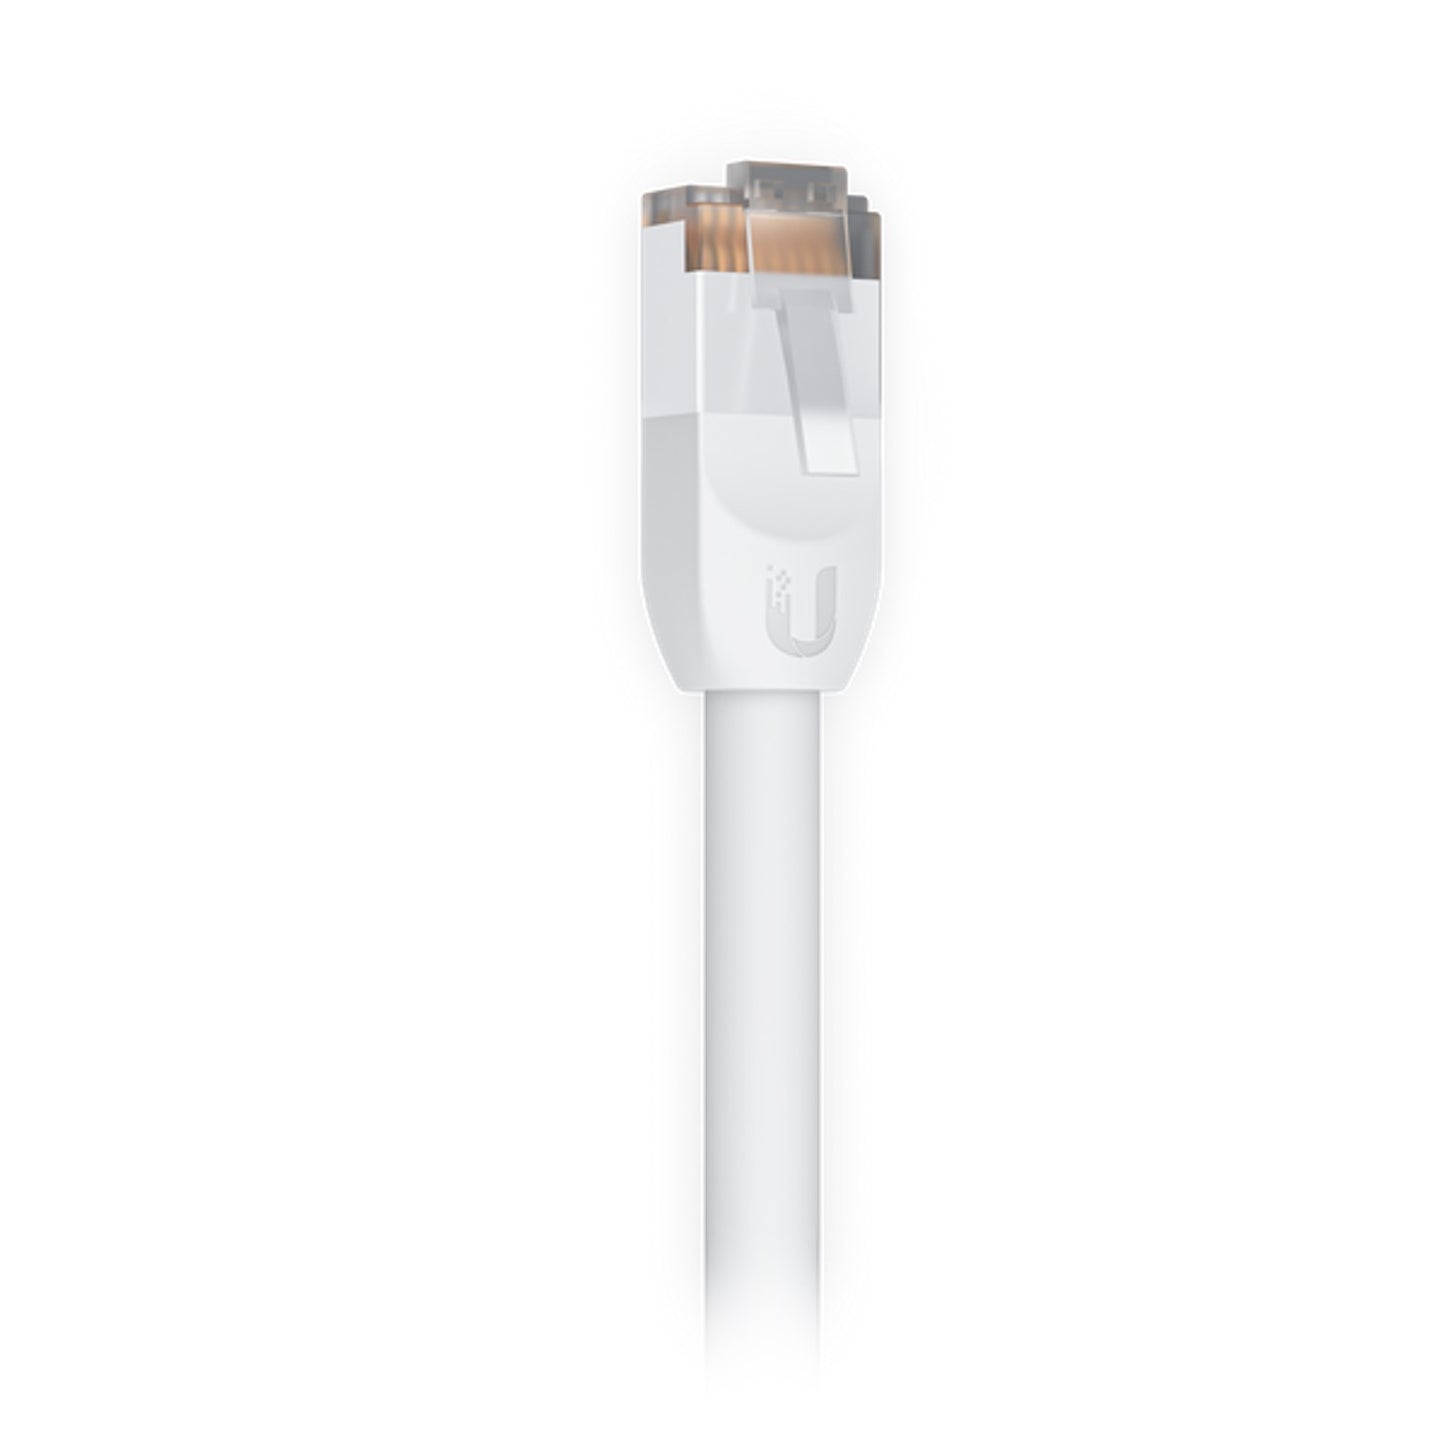 Ubiquiti UniFi Patch Cable Outdoor 3M White, Single Unit, All-weather, RJ45 Ethernet Cable, Category 5e, 2Yr Warr UACC-Cable-Patch-Outdoor-3M-W